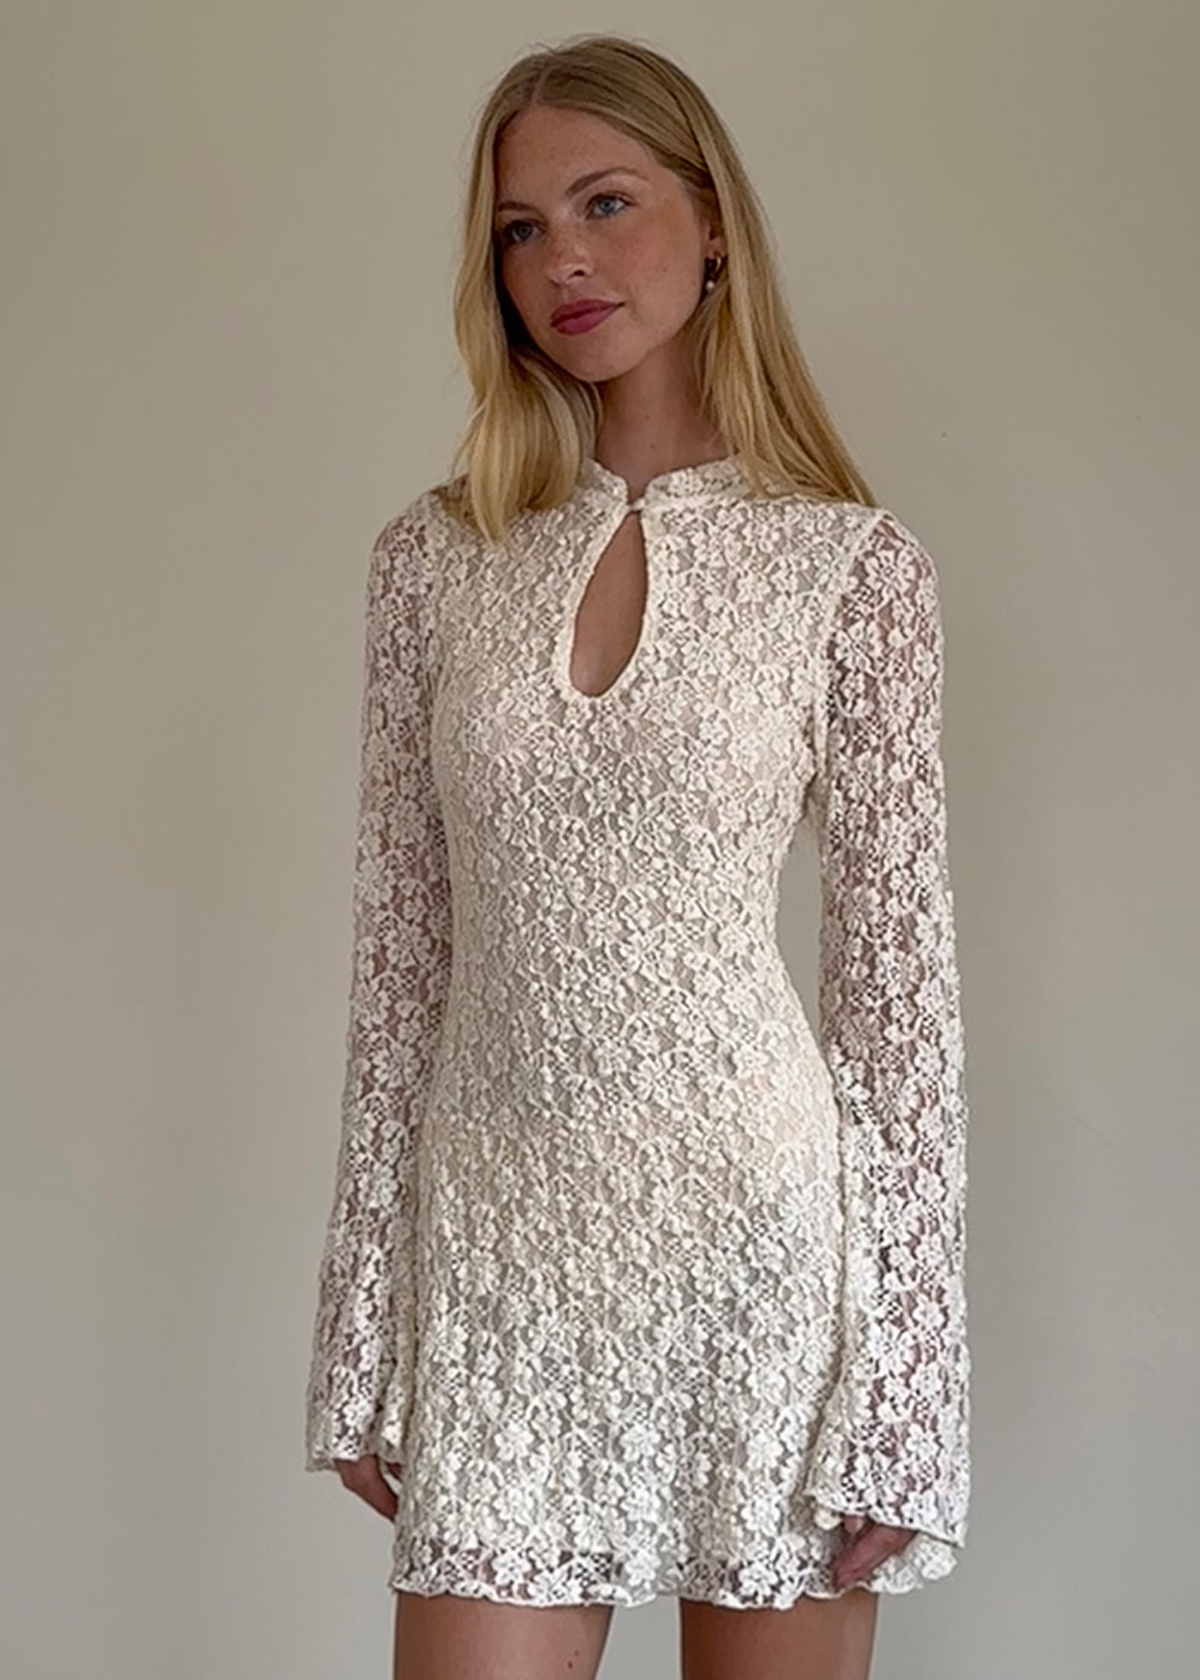 60s-inspired wedding dress! Ivory Floral Lace Bell Sleeve Mini Dress with high neckline and keyhole cutout at front. Lined through the body, sheer through sleeves. By Motel Rocks. 